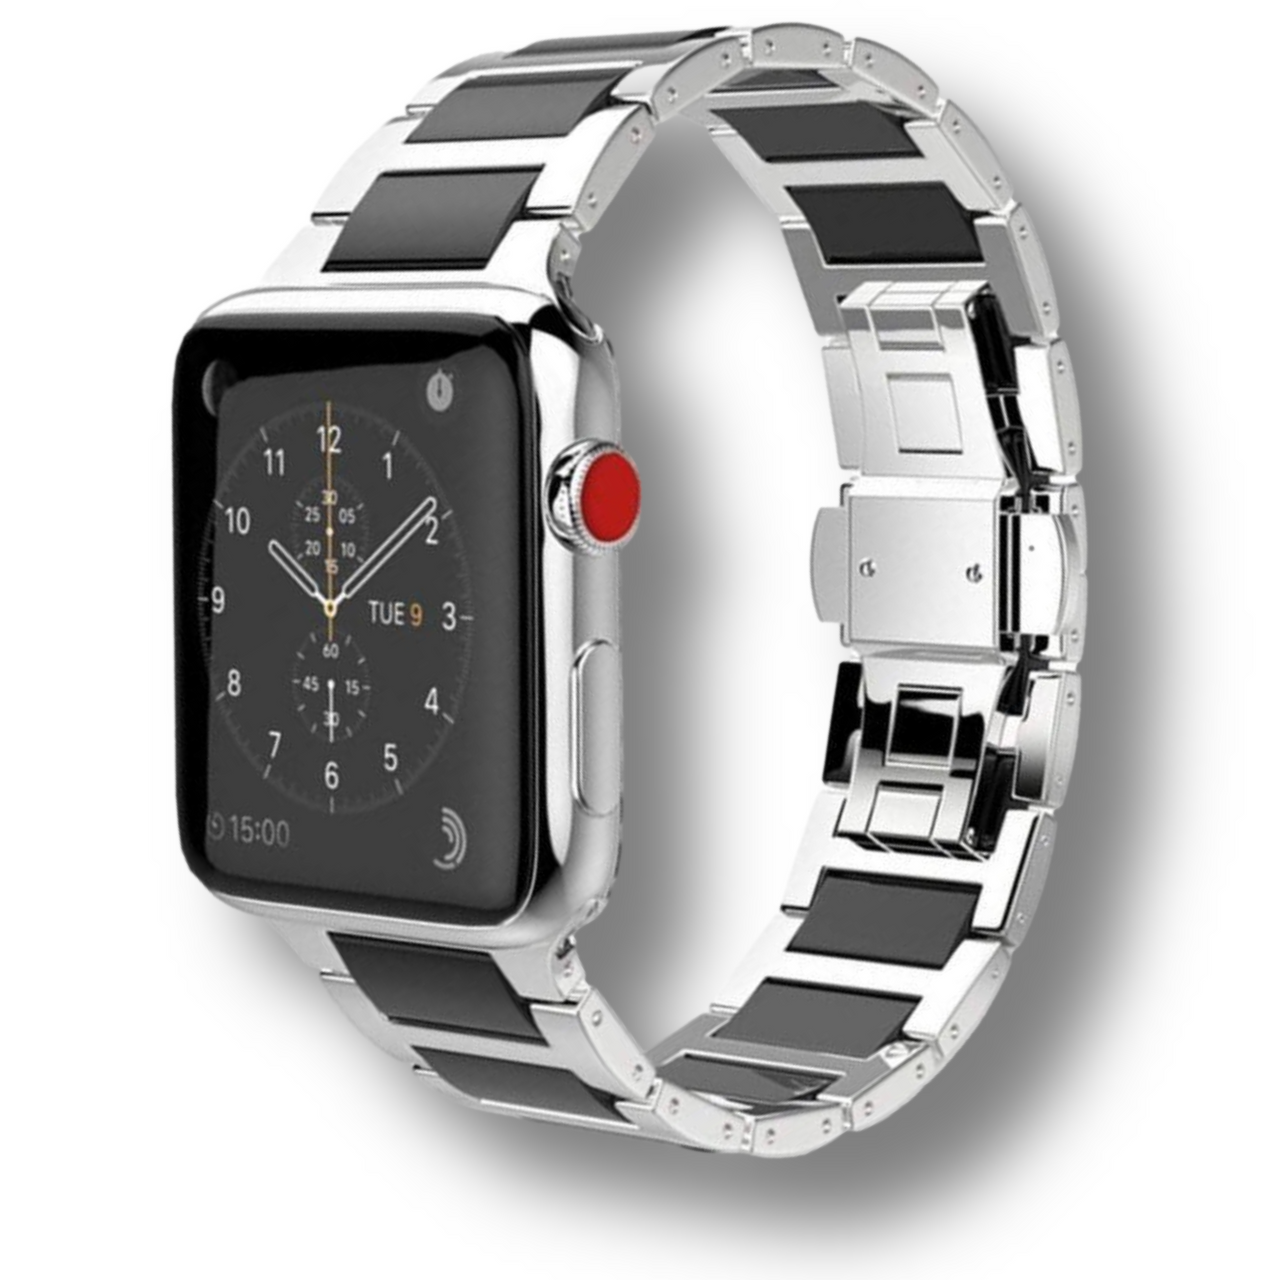 Ceramic Link Bracelet with Stainless Steel for Apple Watch - watchband.direct